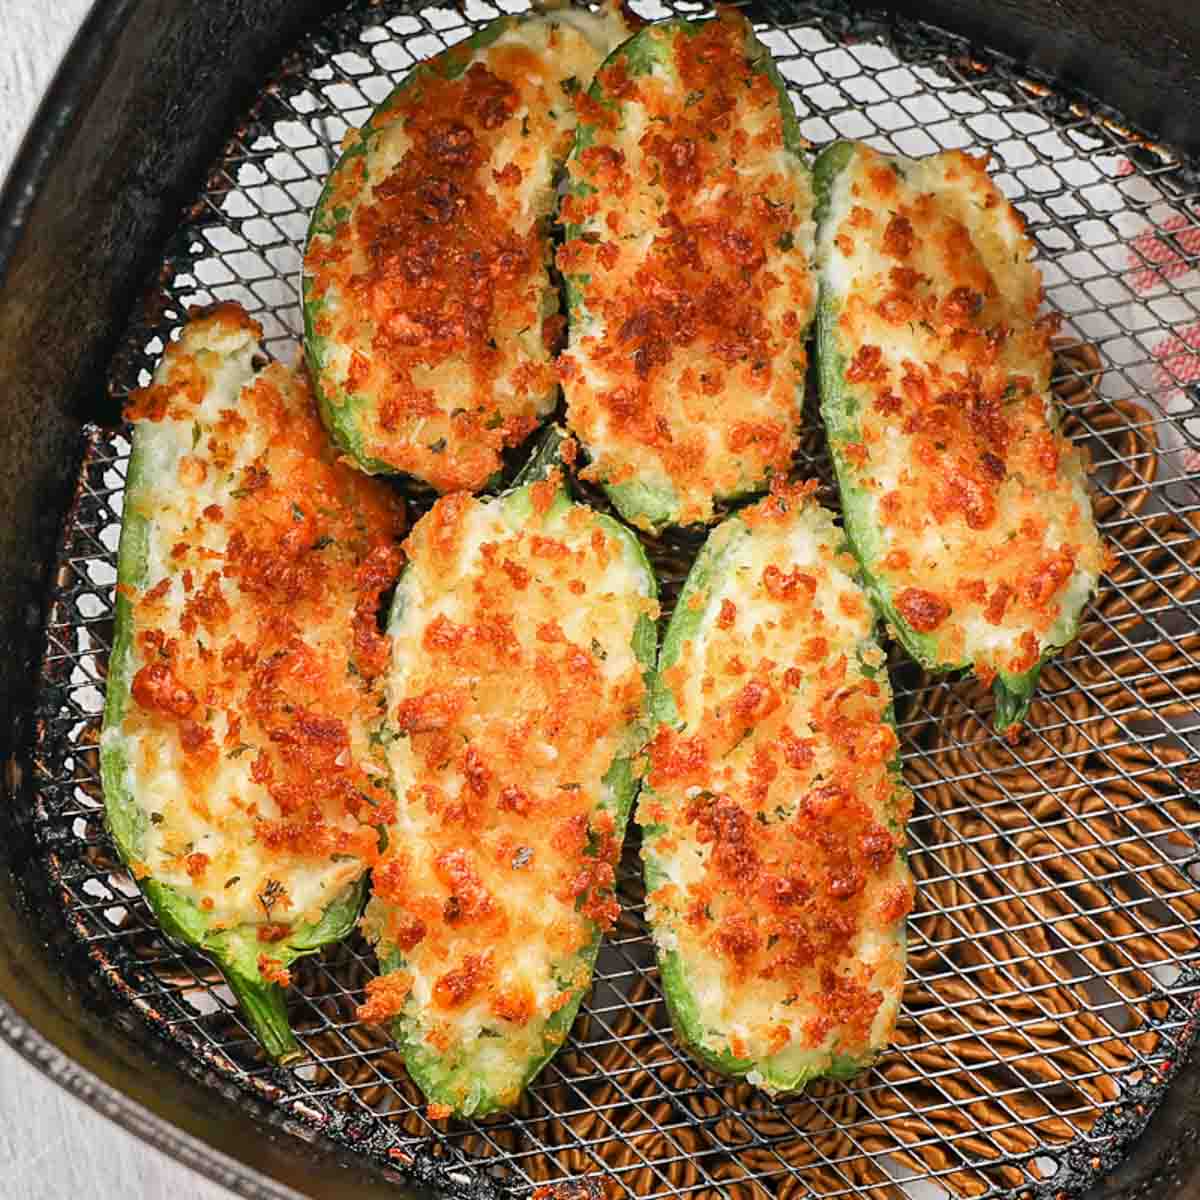 Jalapeno Poppers fully cooked and golden brown in the air fryer basket